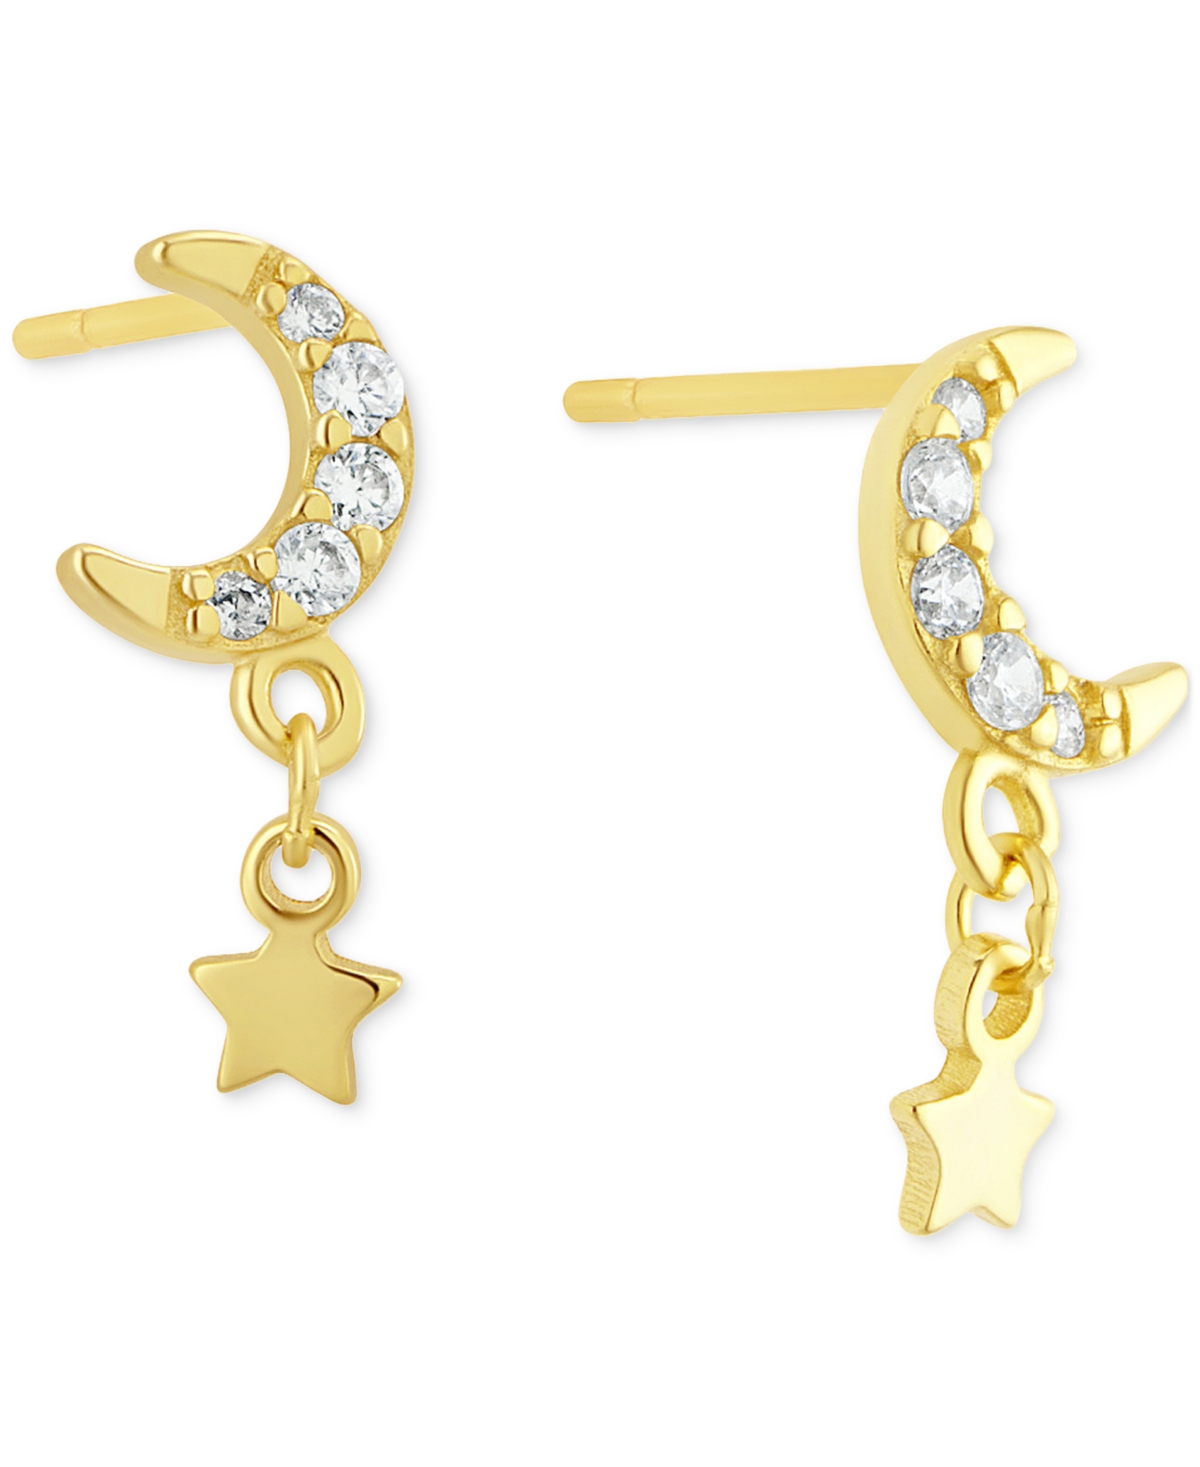 Giani Bernini Cubic Zirconia Moon & Stars Drop Earrings In 18k Gold-plated Sterling Silver, Created For Macy's